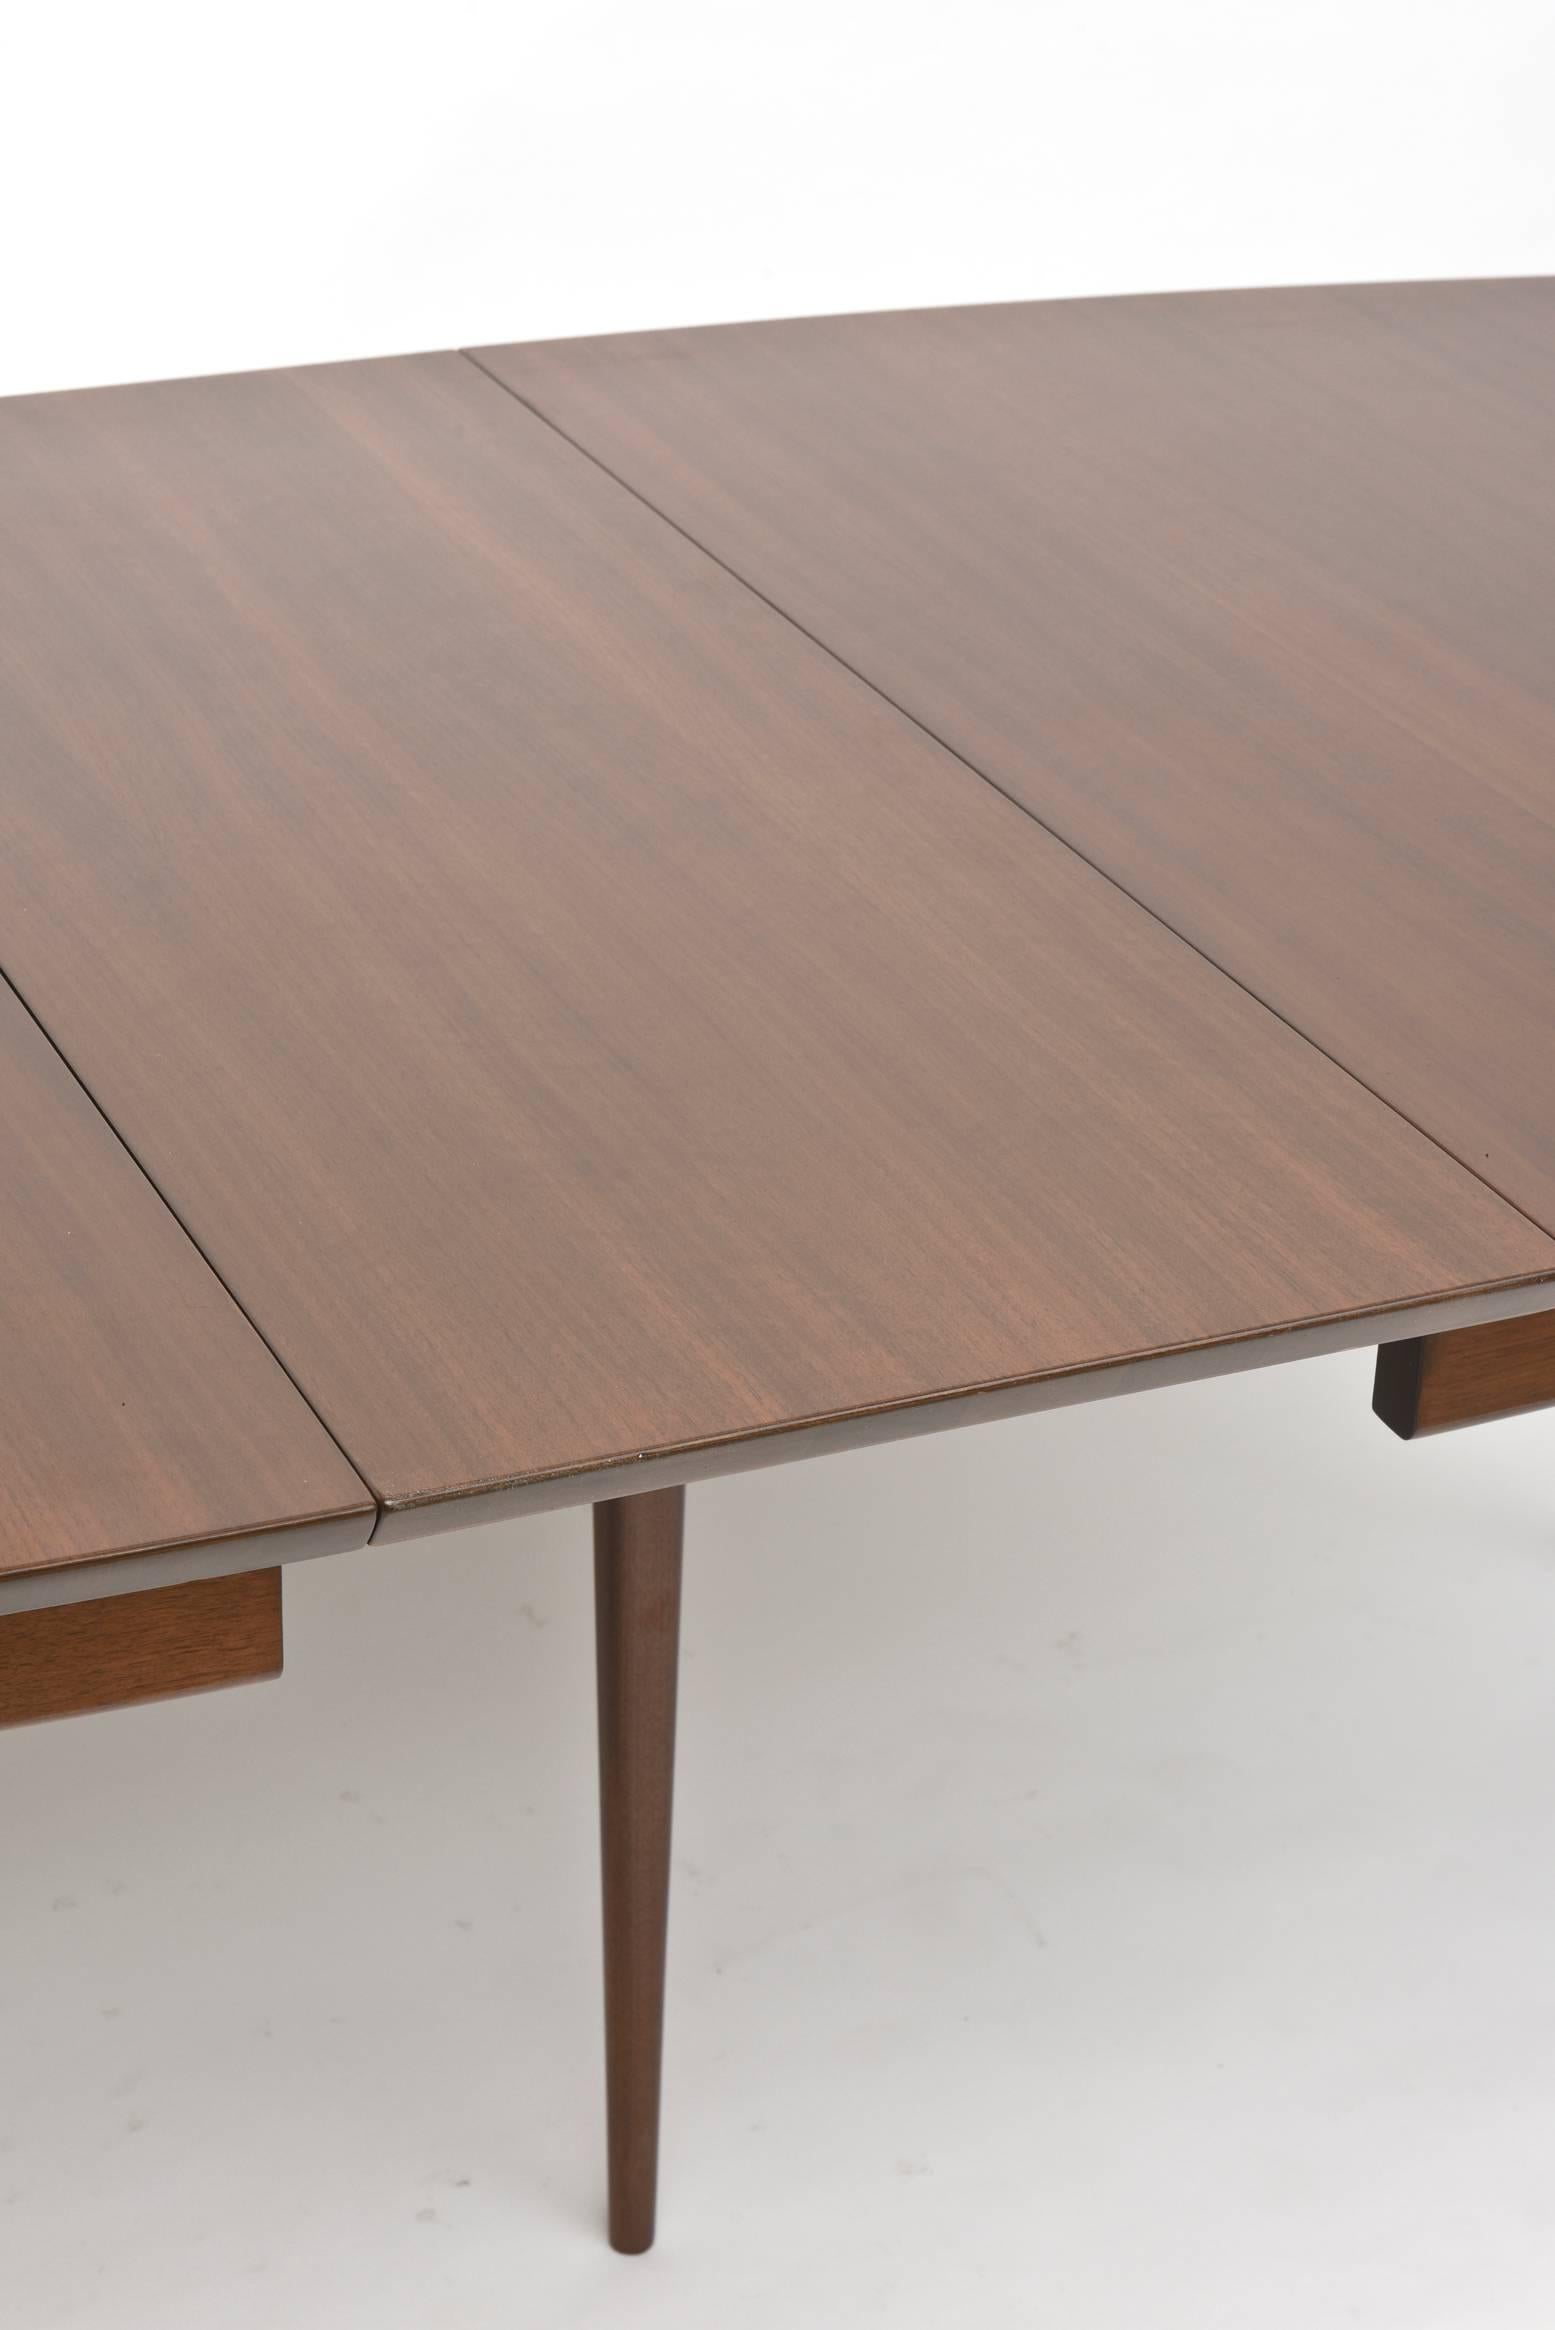 American Carlo de Carli for Singer and Sons Walnut Extension Dining Table